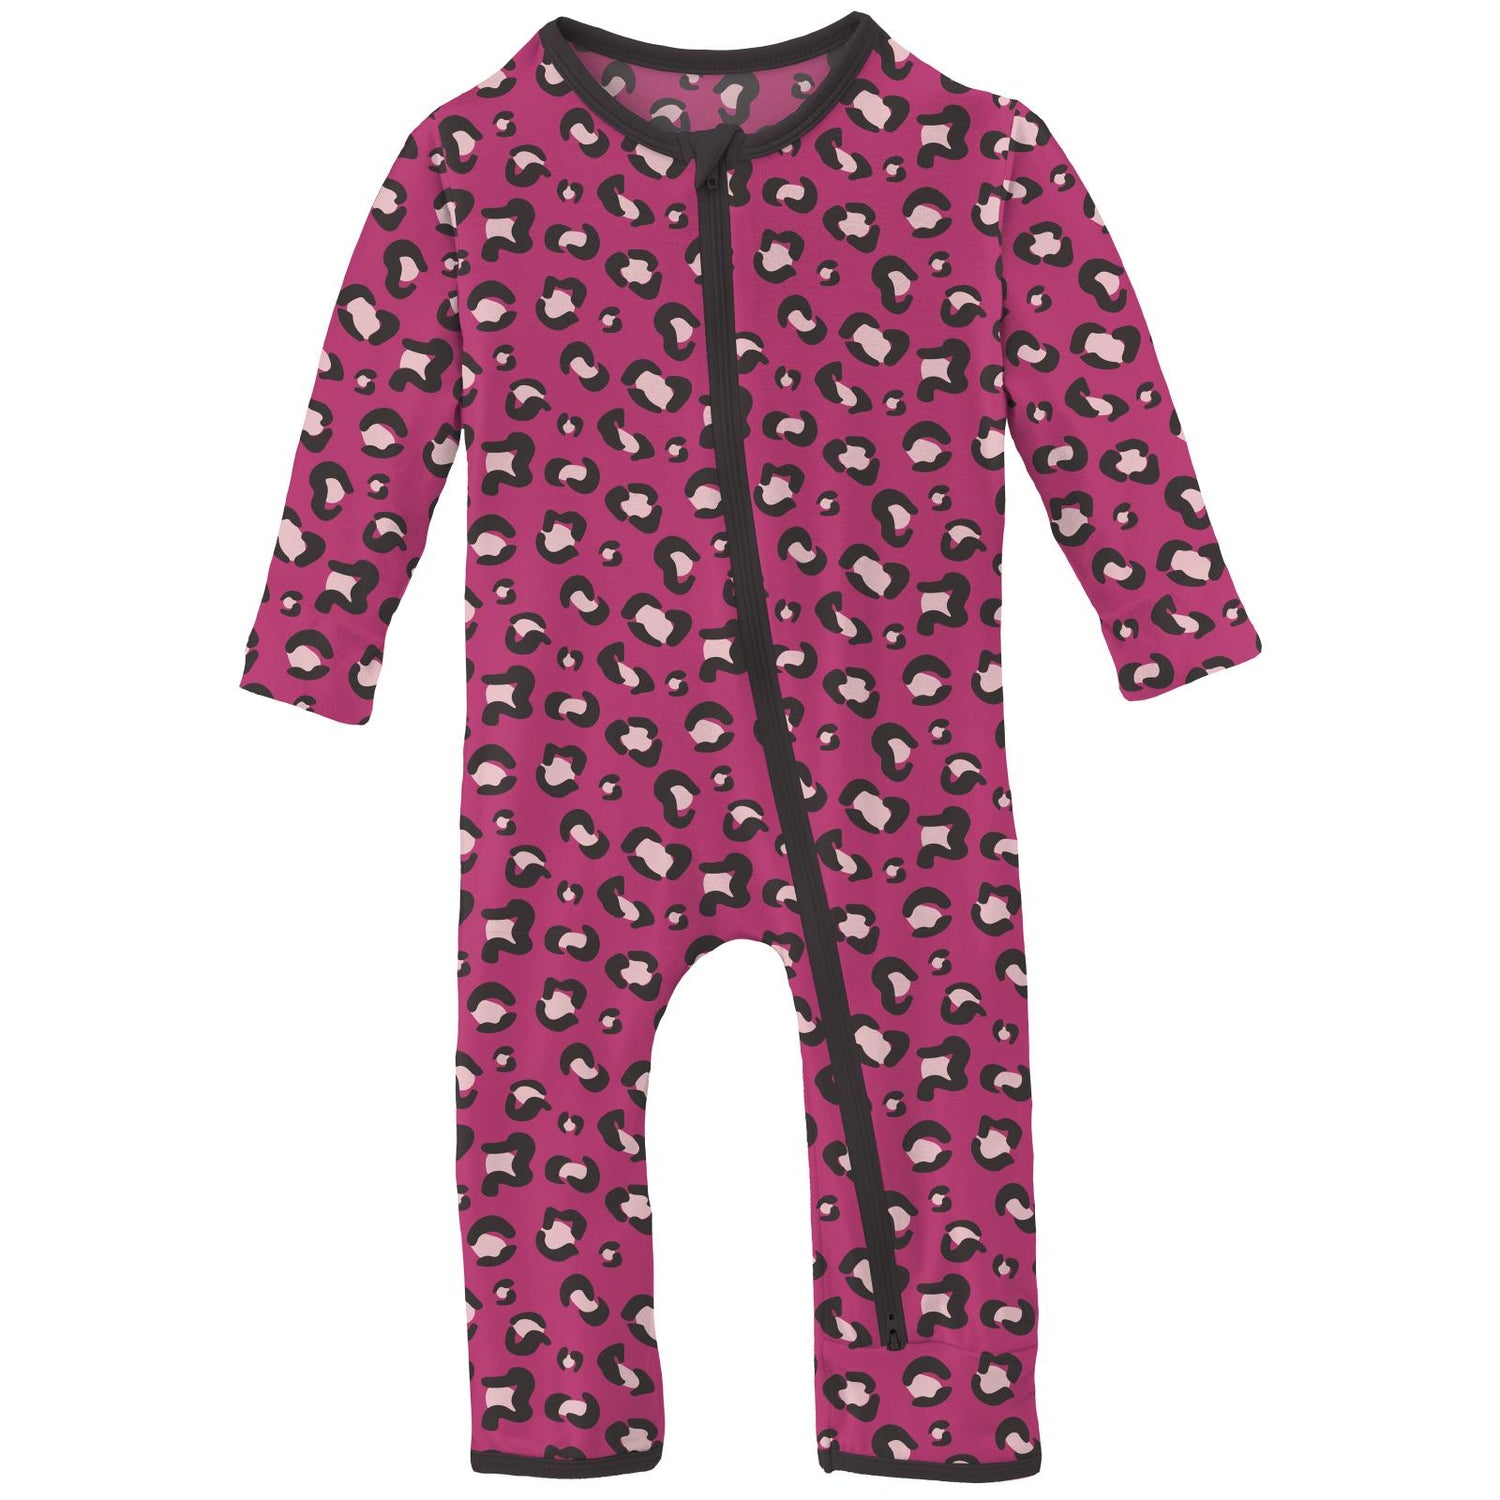 Print Coverall with 2 Way Zipper in Calypso Cheetah Print